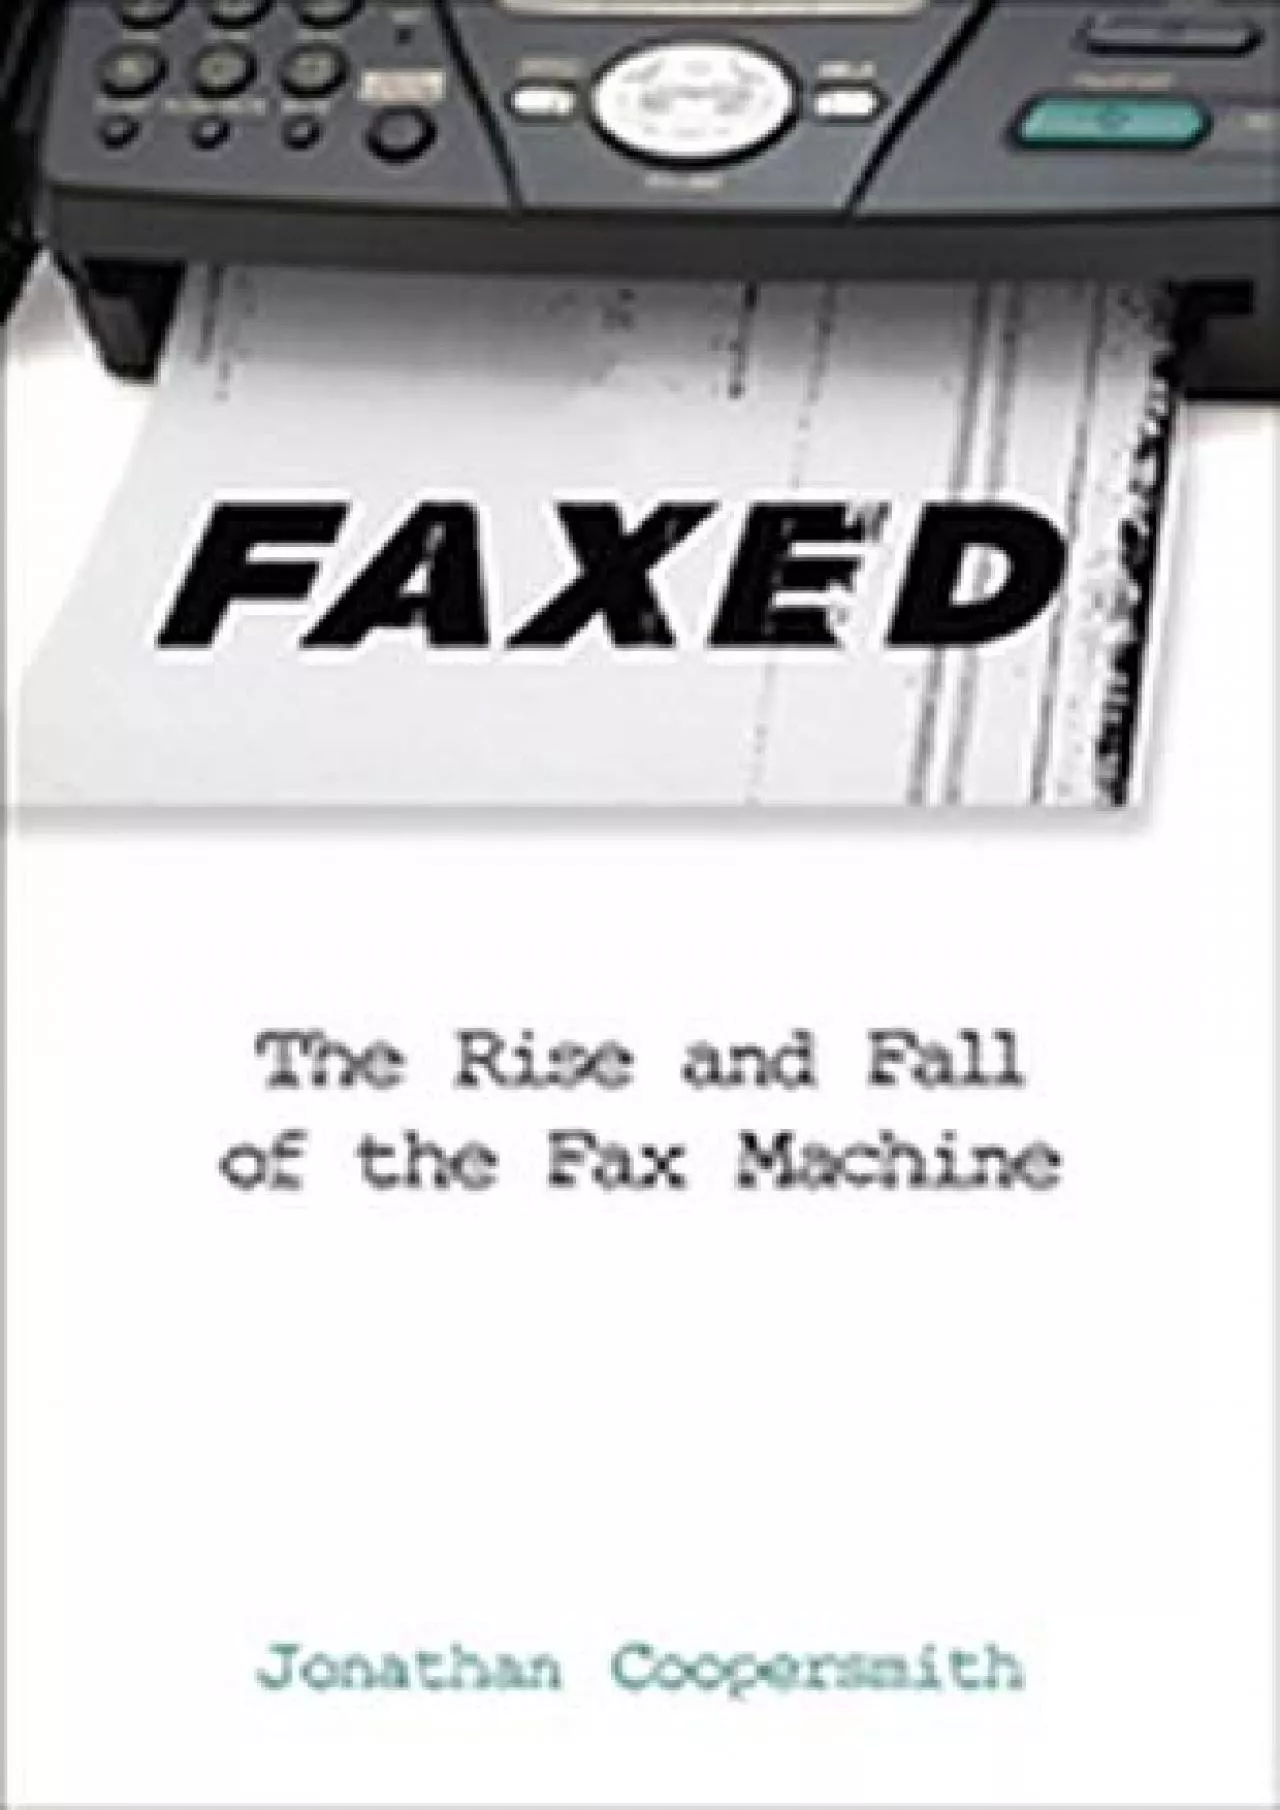 [EBOOK]-Faxed: The Rise and Fall of the Fax Machine (Johns Hopkins Studies in the History